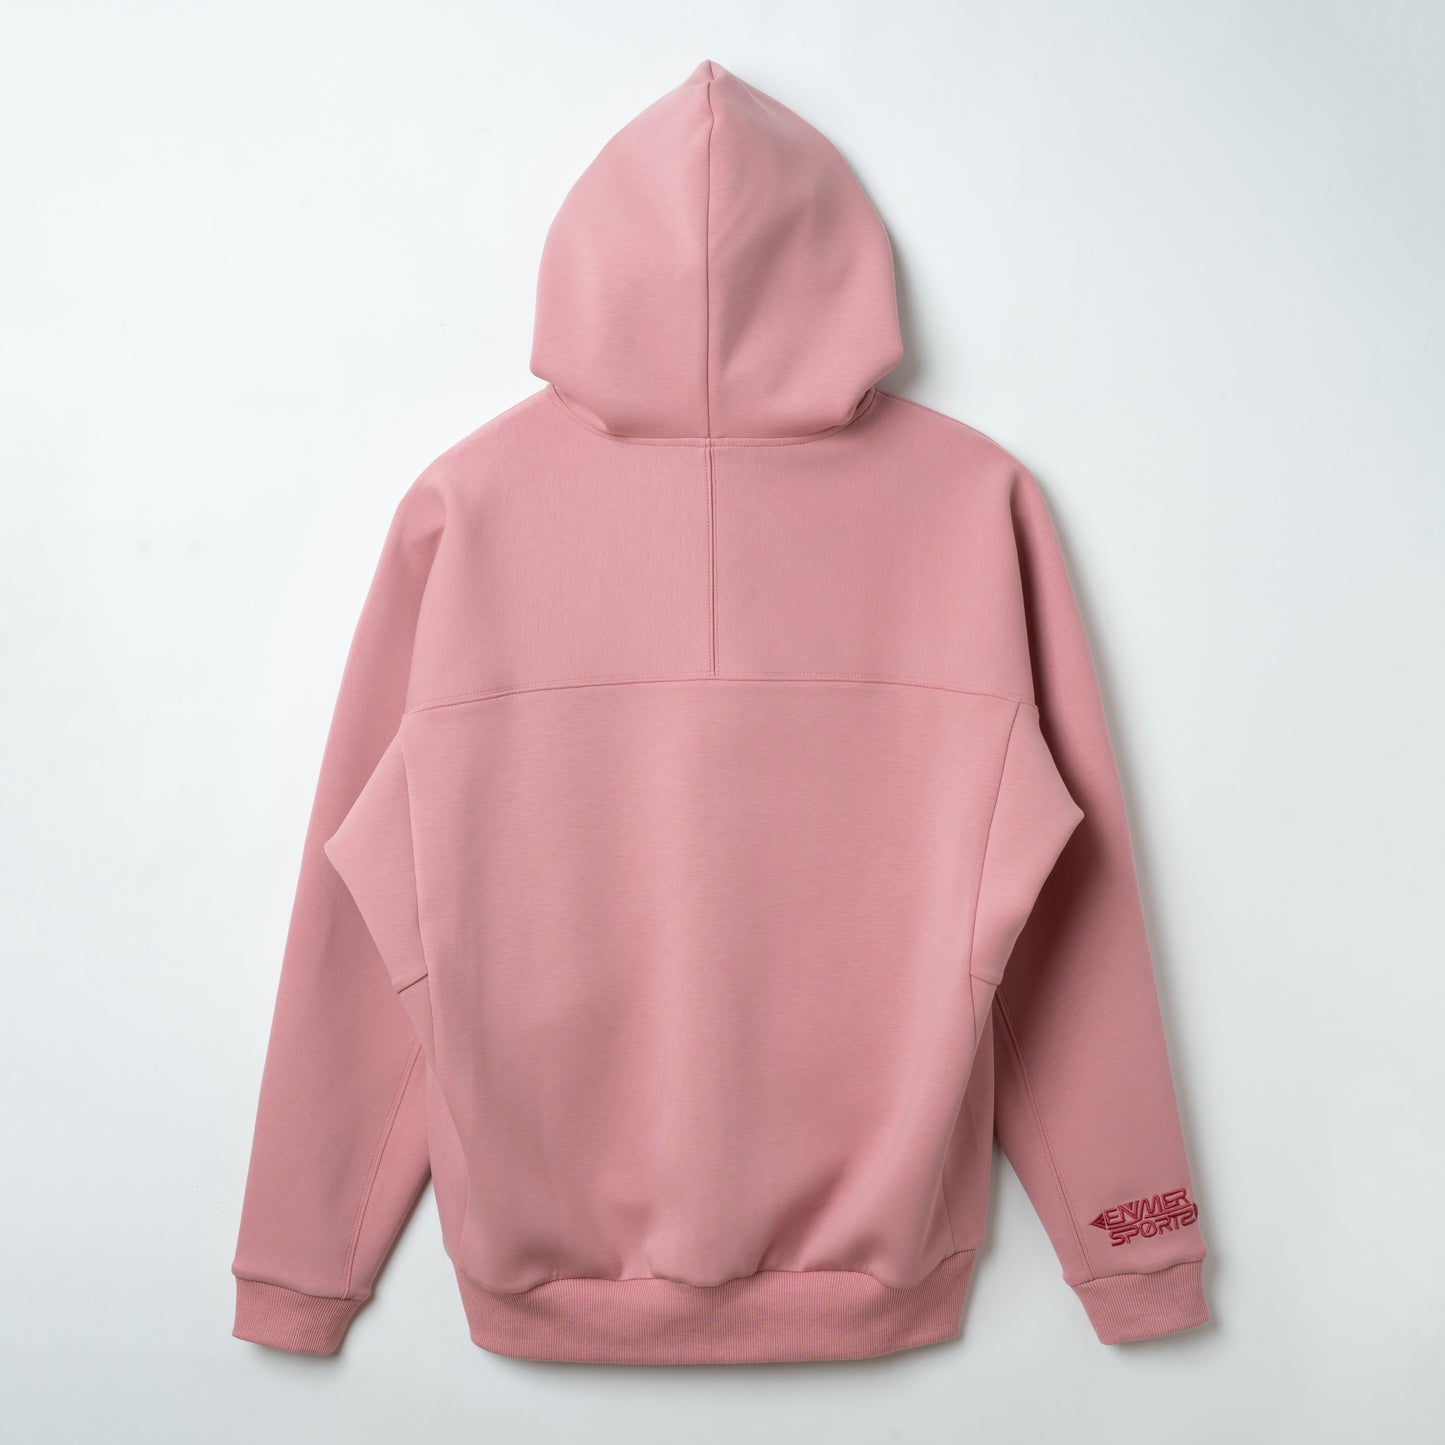 SPORTS MOVING HOODIE 2nd PINK